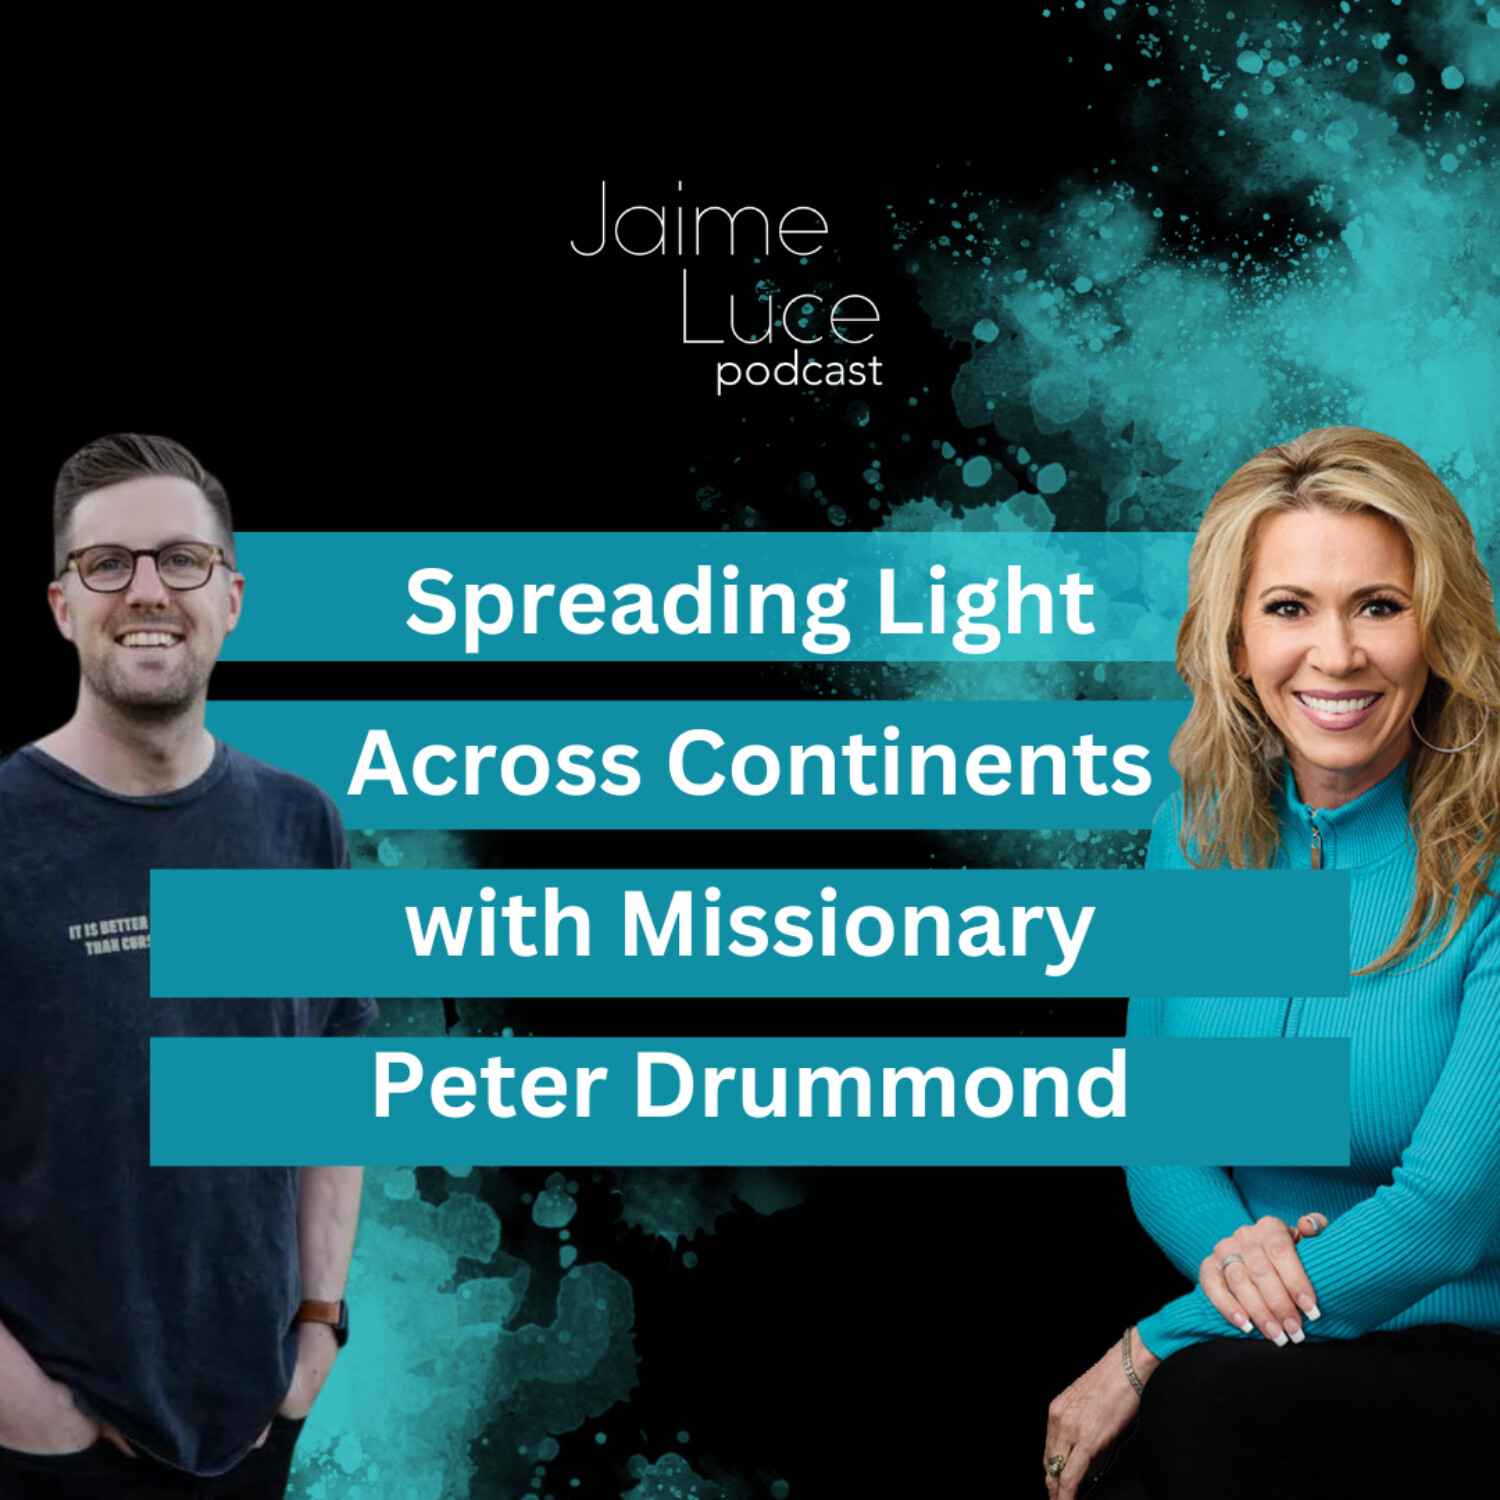 Spreading Light Across Continents with Missionary Peter Drummond